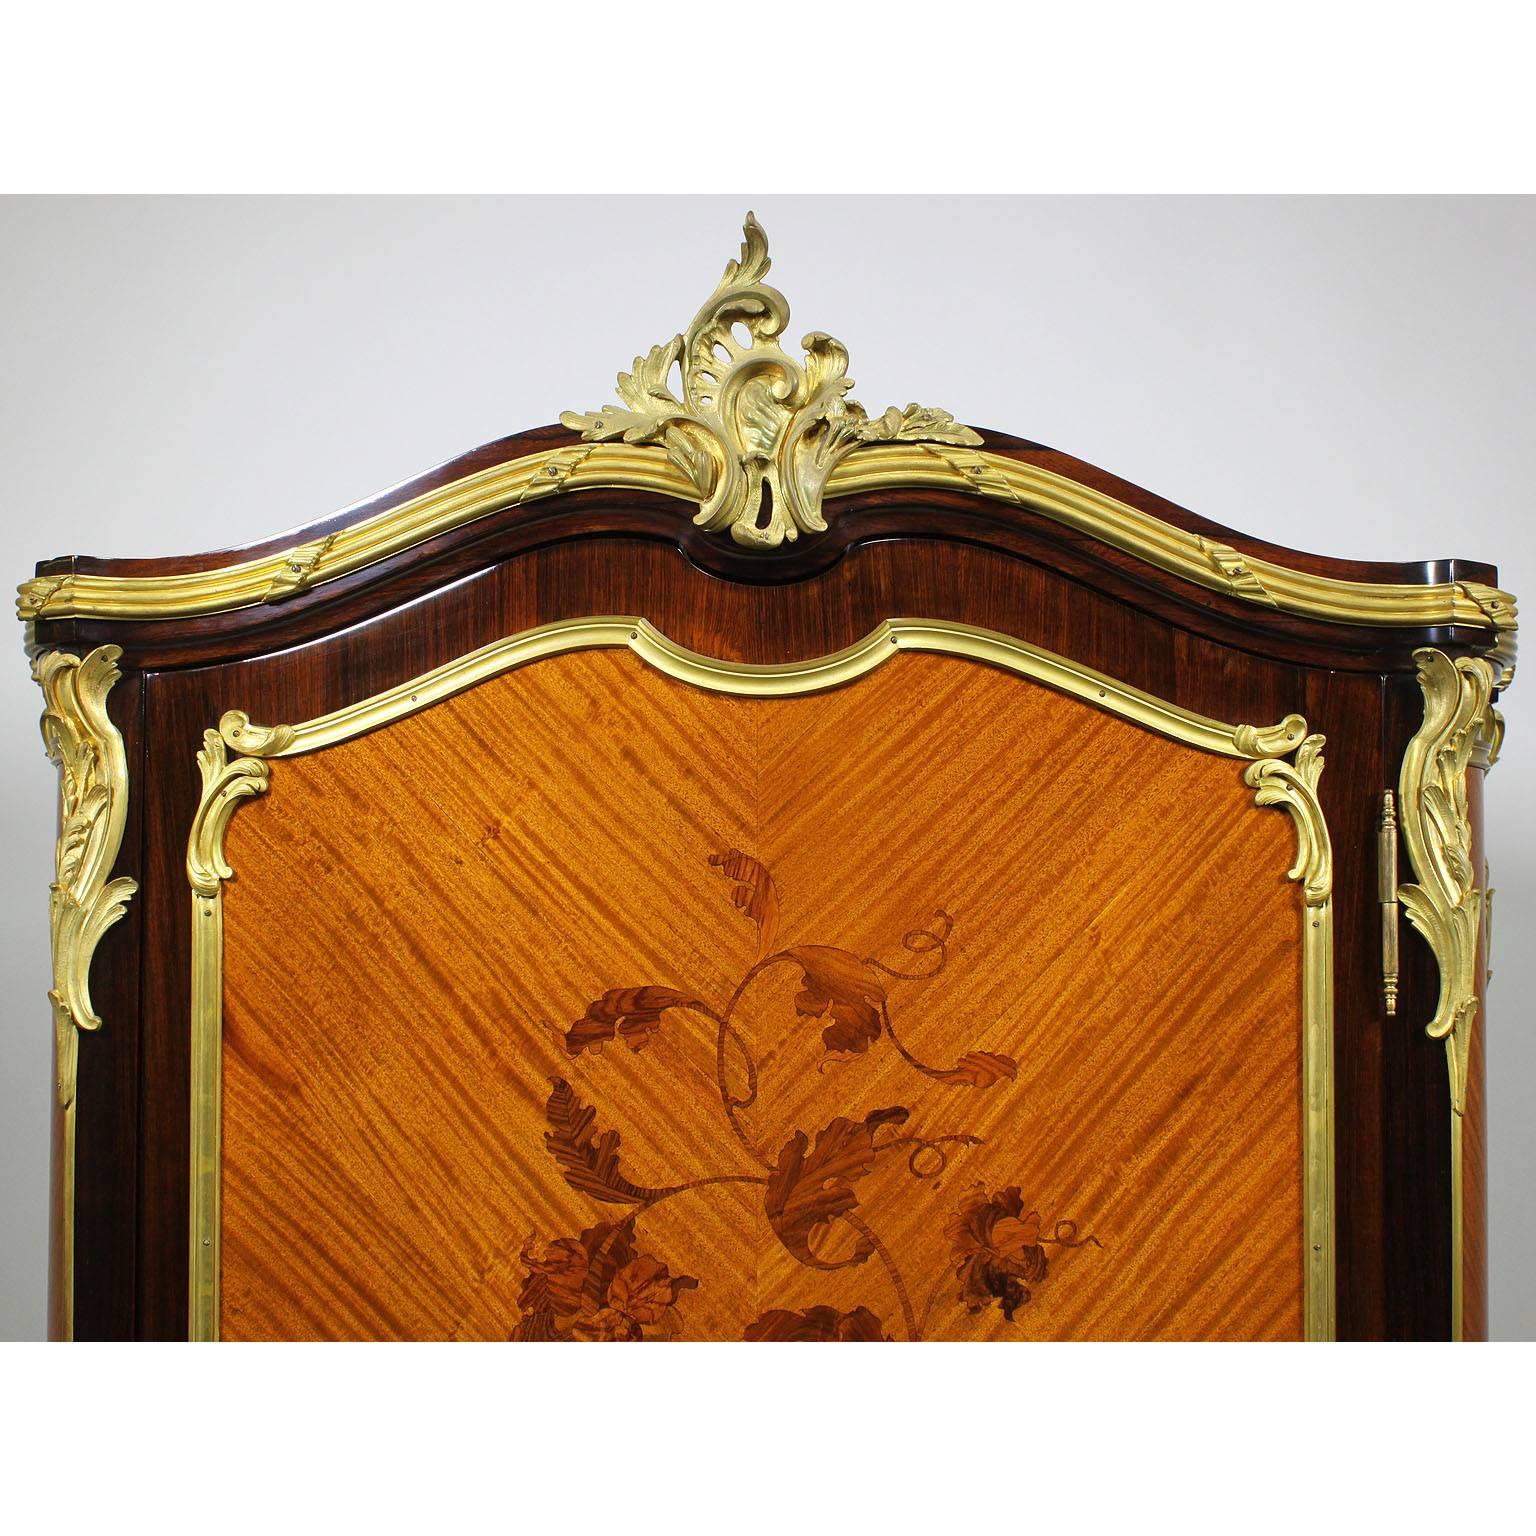 Kingwood French 19th-20th Century Louis XV Style Gilt-Bronze Mounted & Marquetry Cabinet For Sale